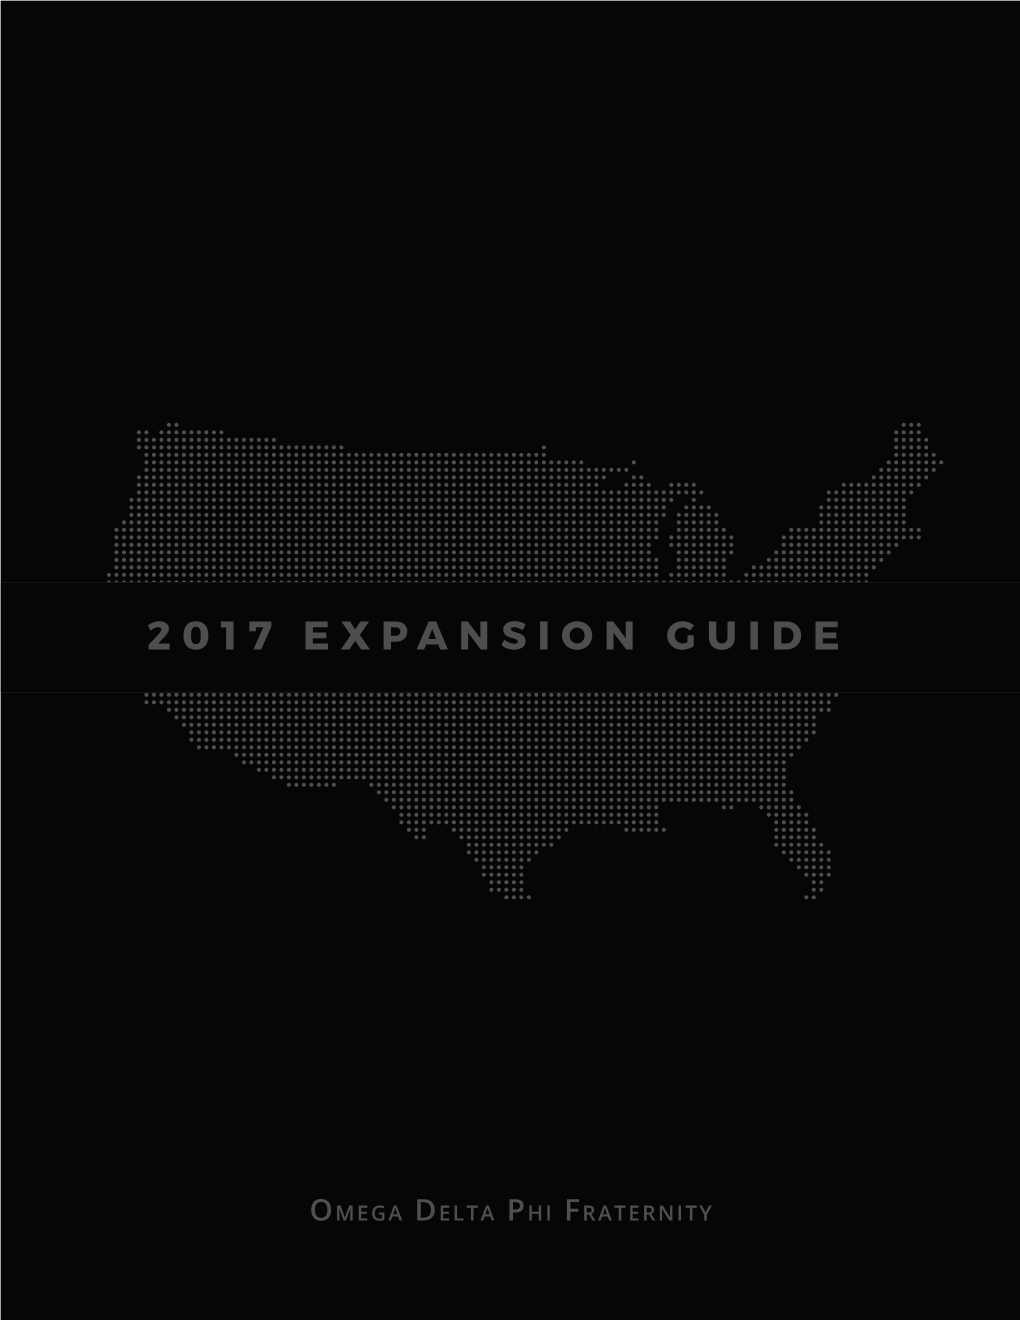 2017 Expansion Guide